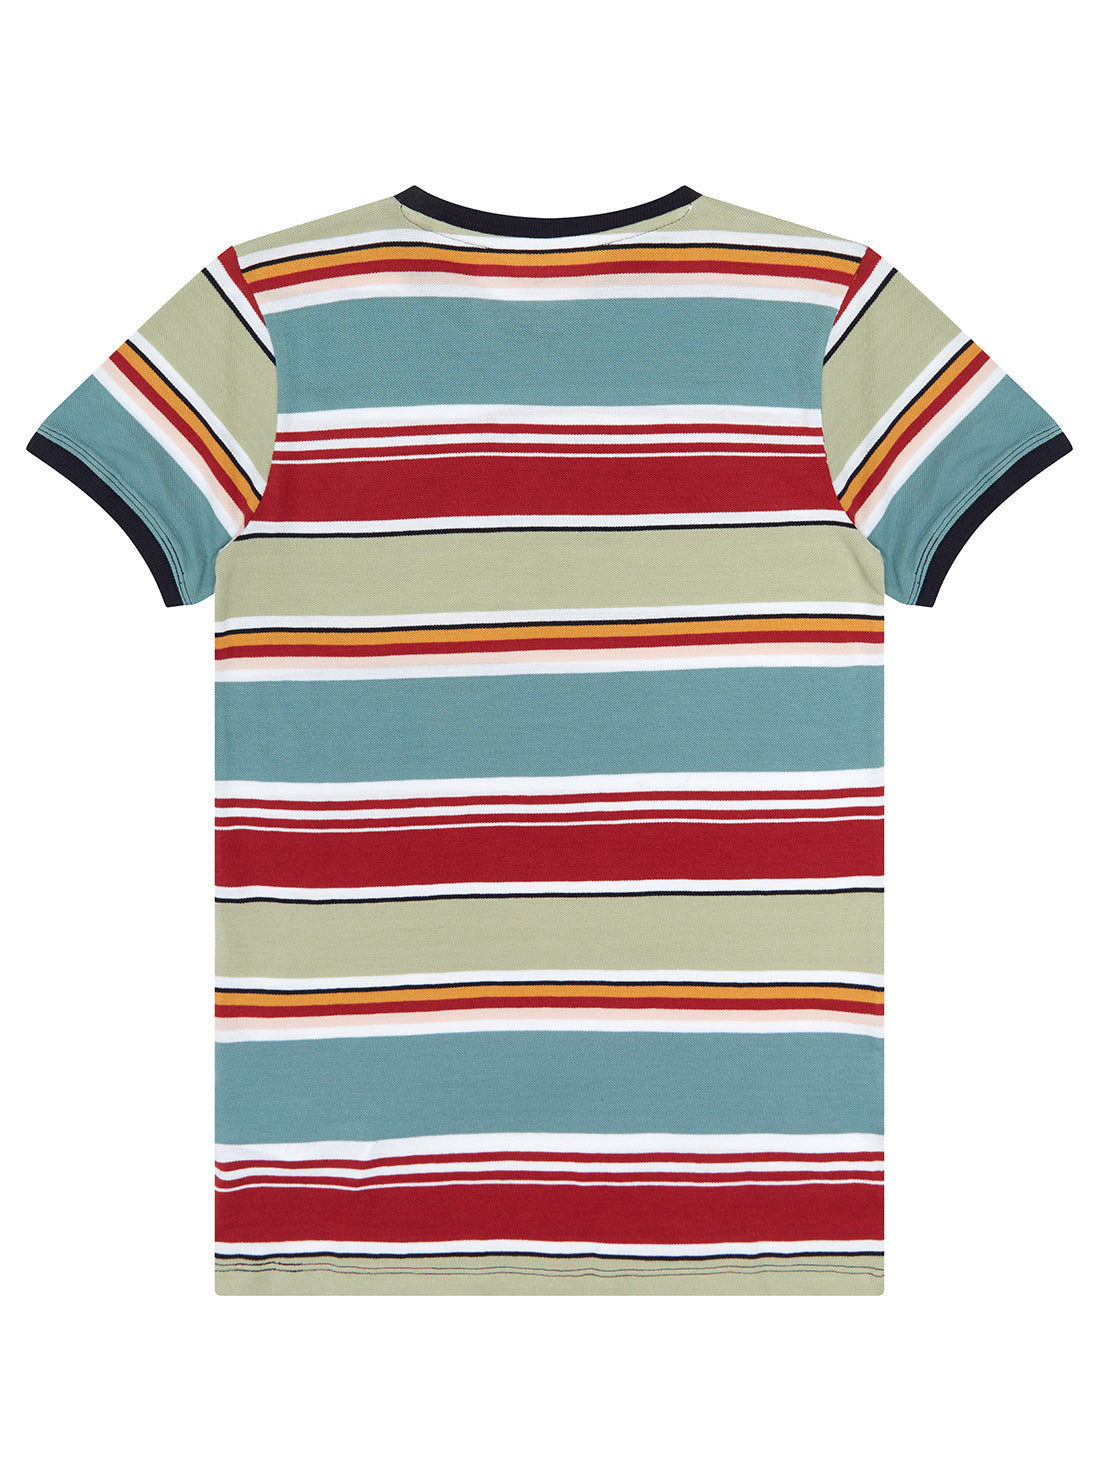 Boy's Red and Orange Stripe Logo T-Shirt (7-16) | GUESS Kids | Front view